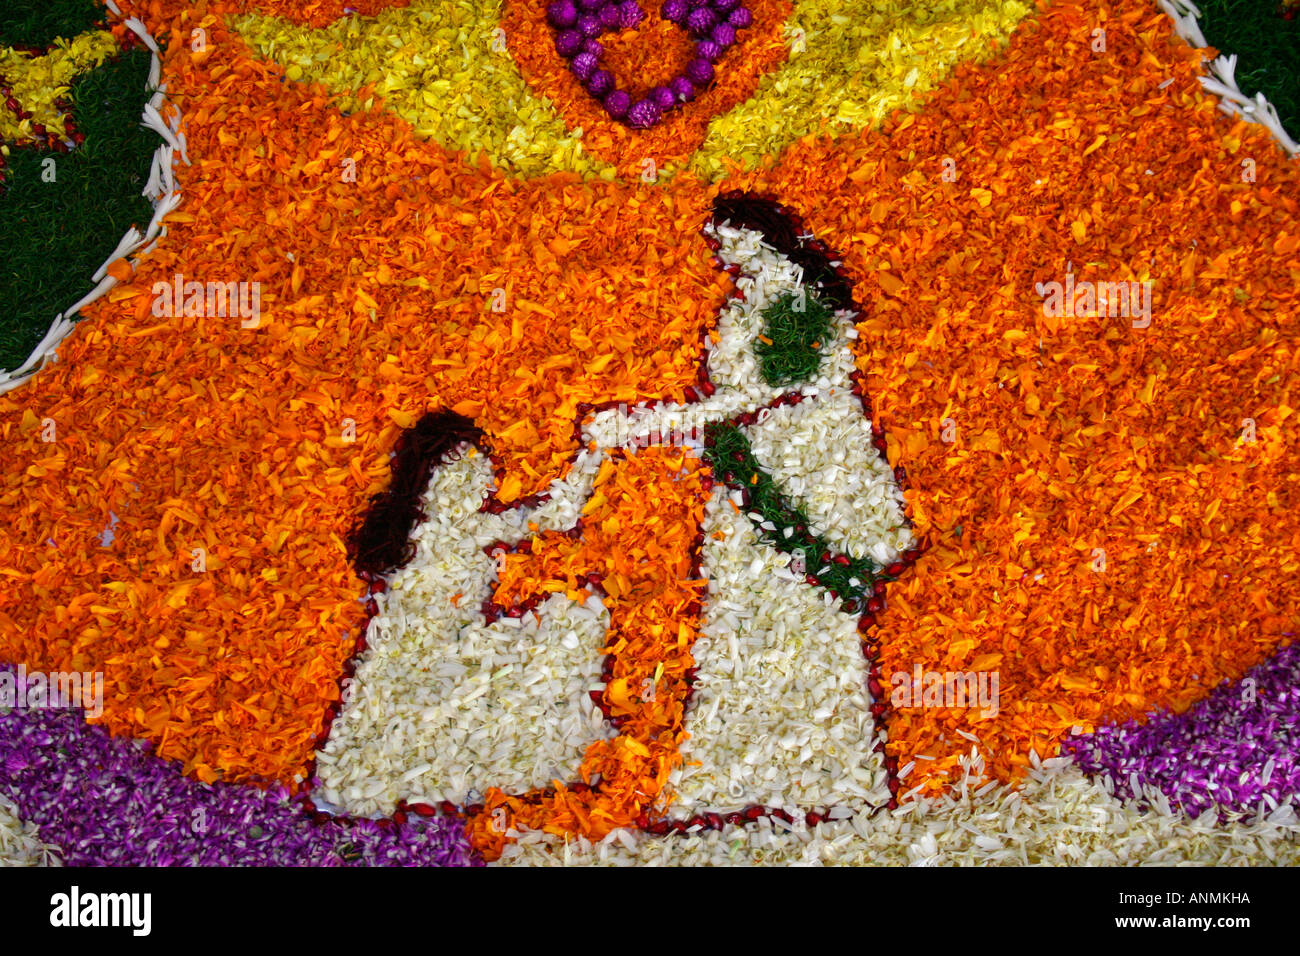 Close up view of flower decorations during  Onam festival at Kerala, India Stock Photo